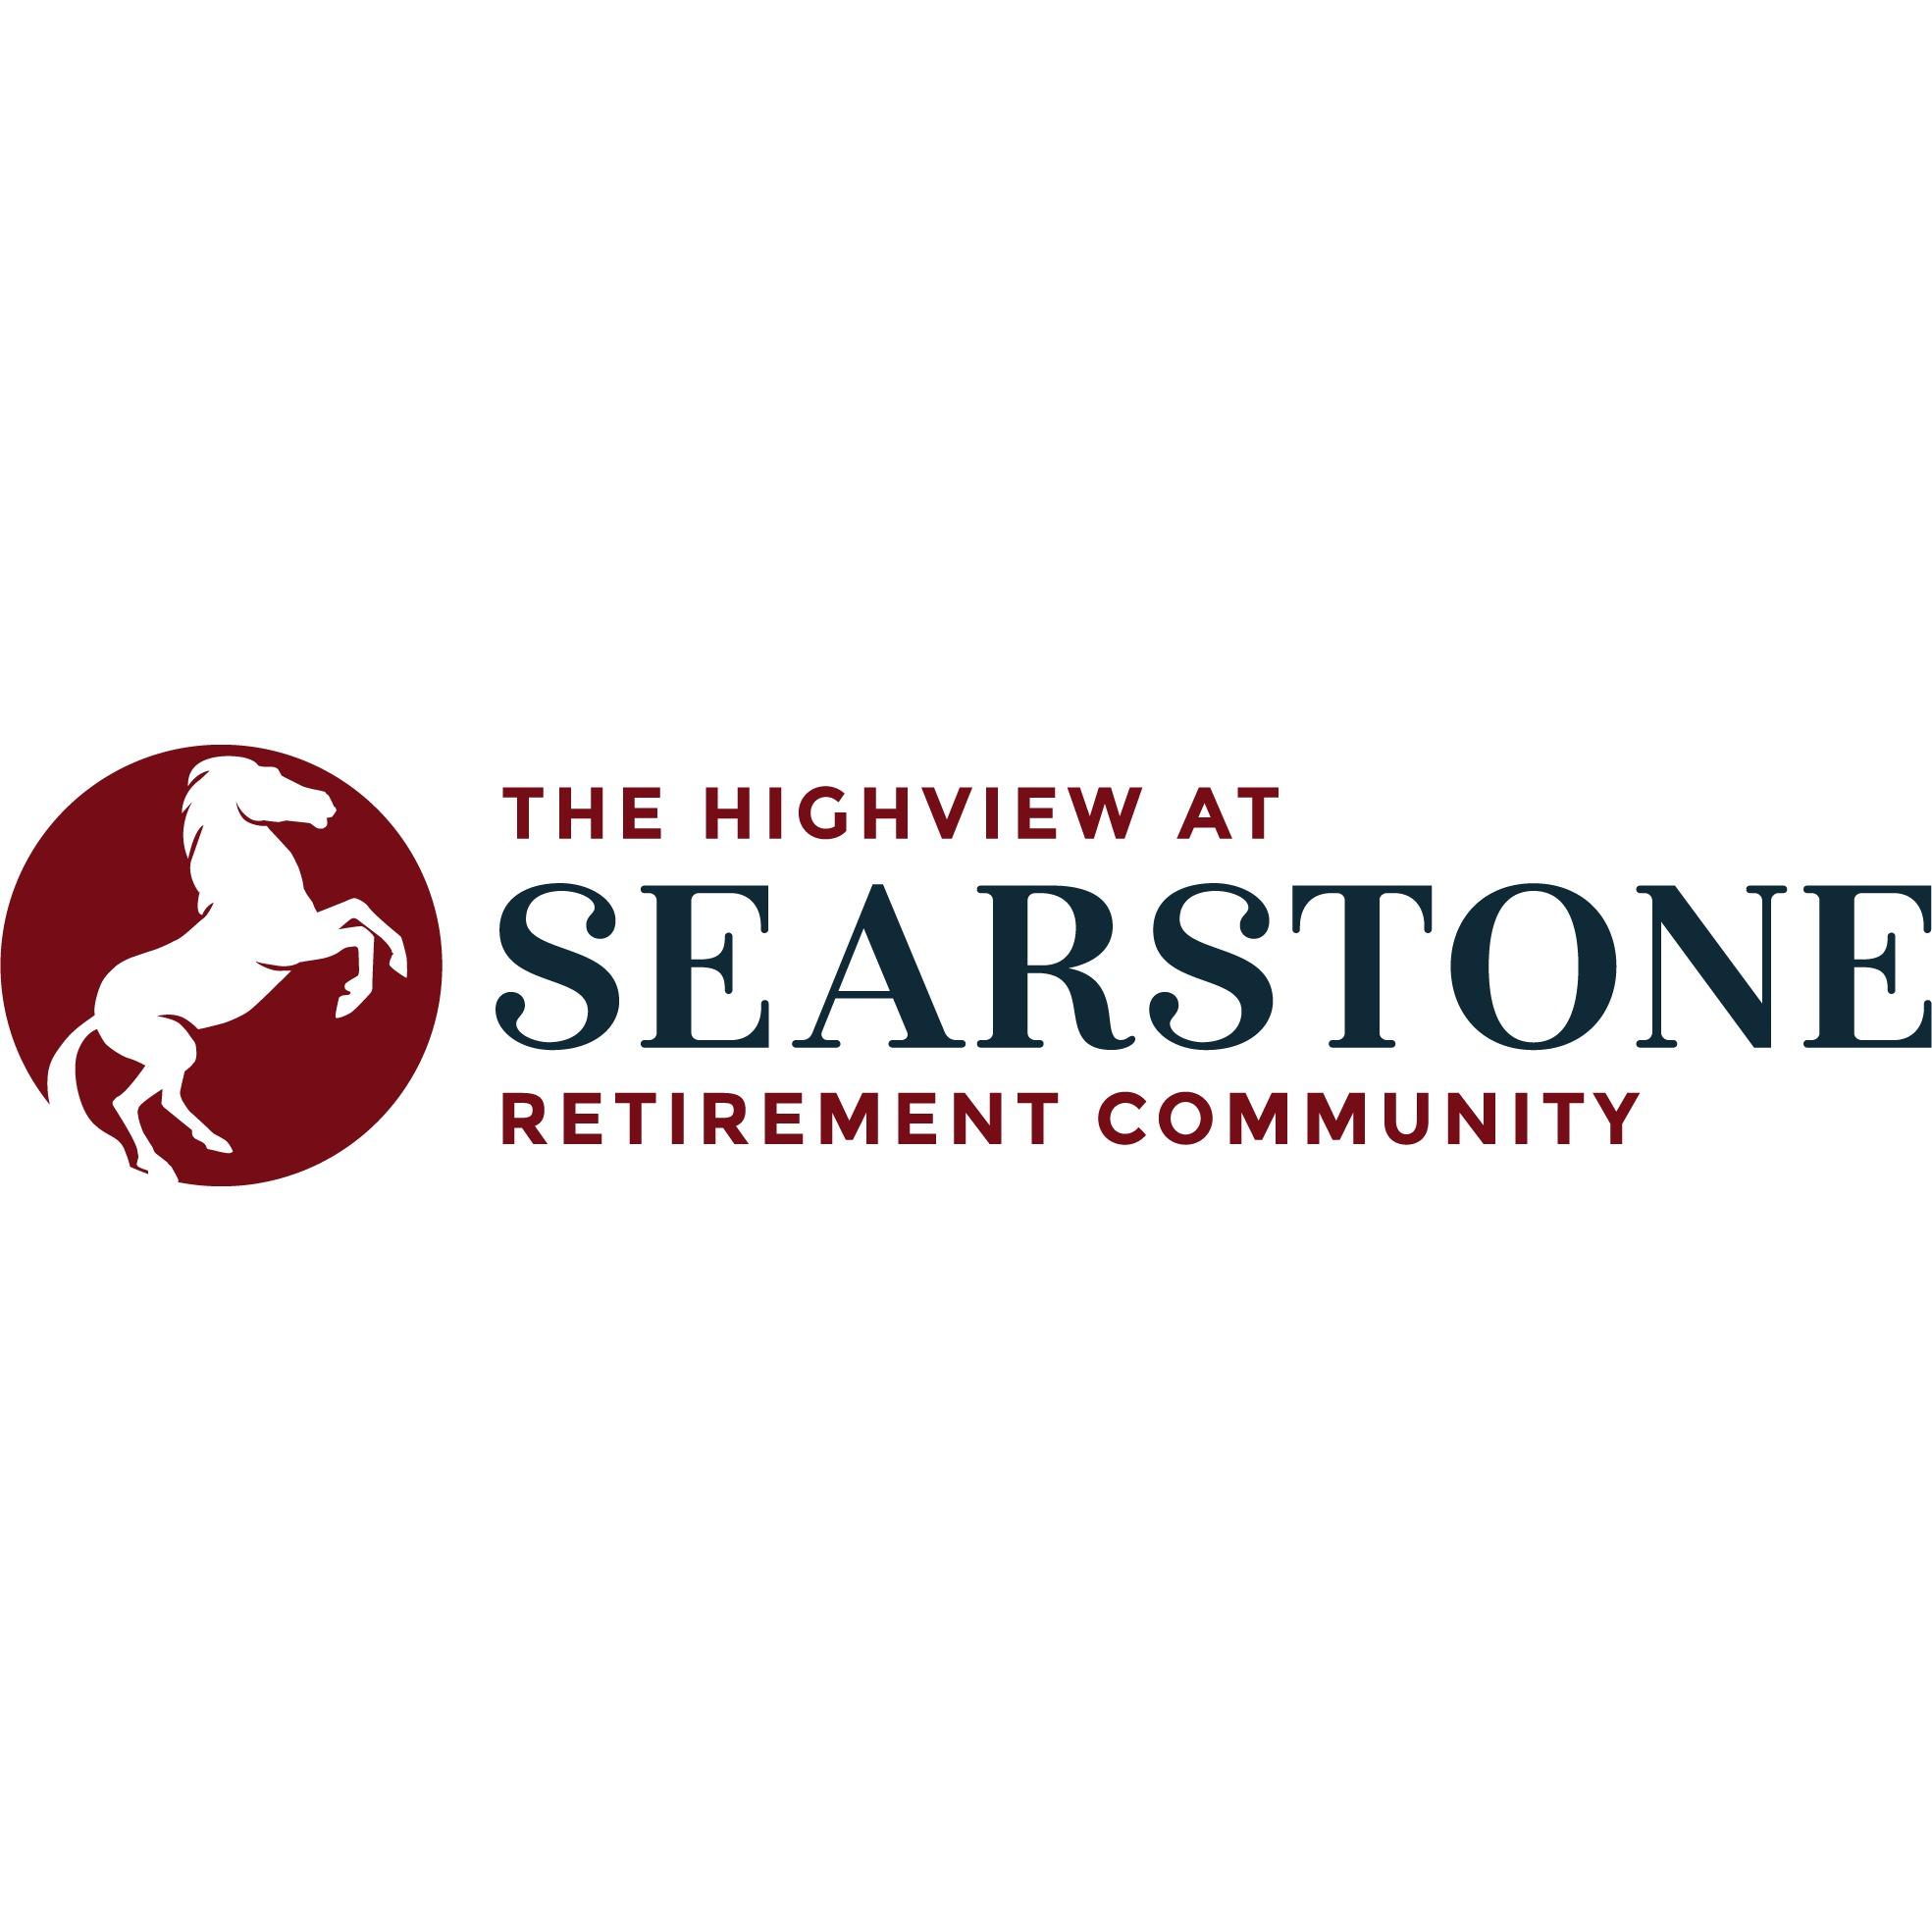 Searstone Retirement Community - Cary, NC 27513 - (919)234-0400 | ShowMeLocal.com